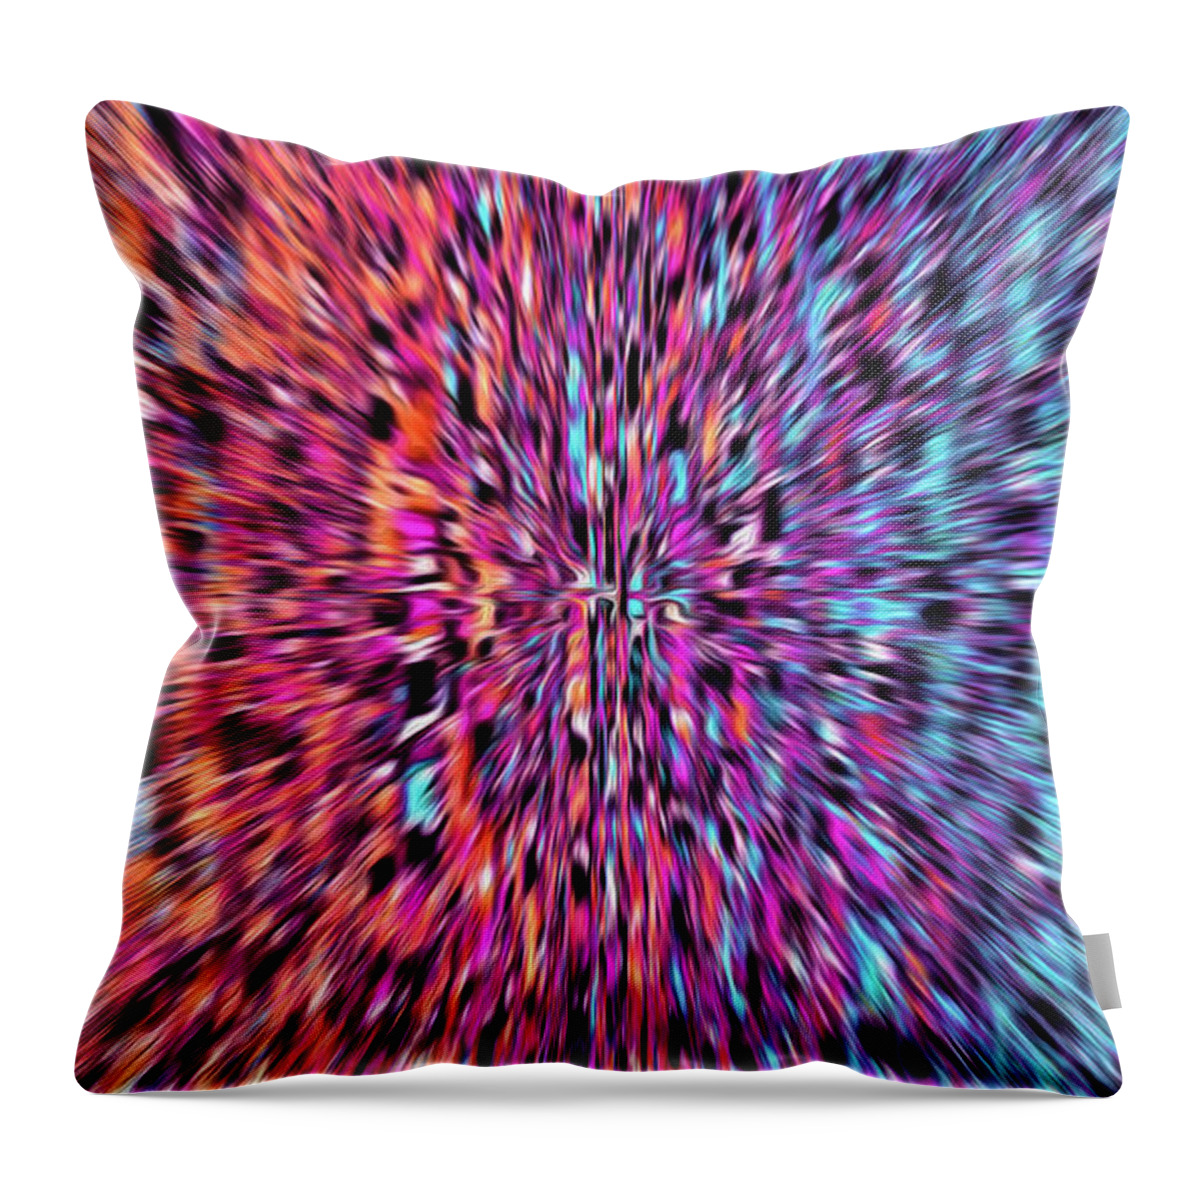 Abstract Throw Pillow featuring the digital art Psychedelic - Trippy Optical Illusion by Ronald Mills